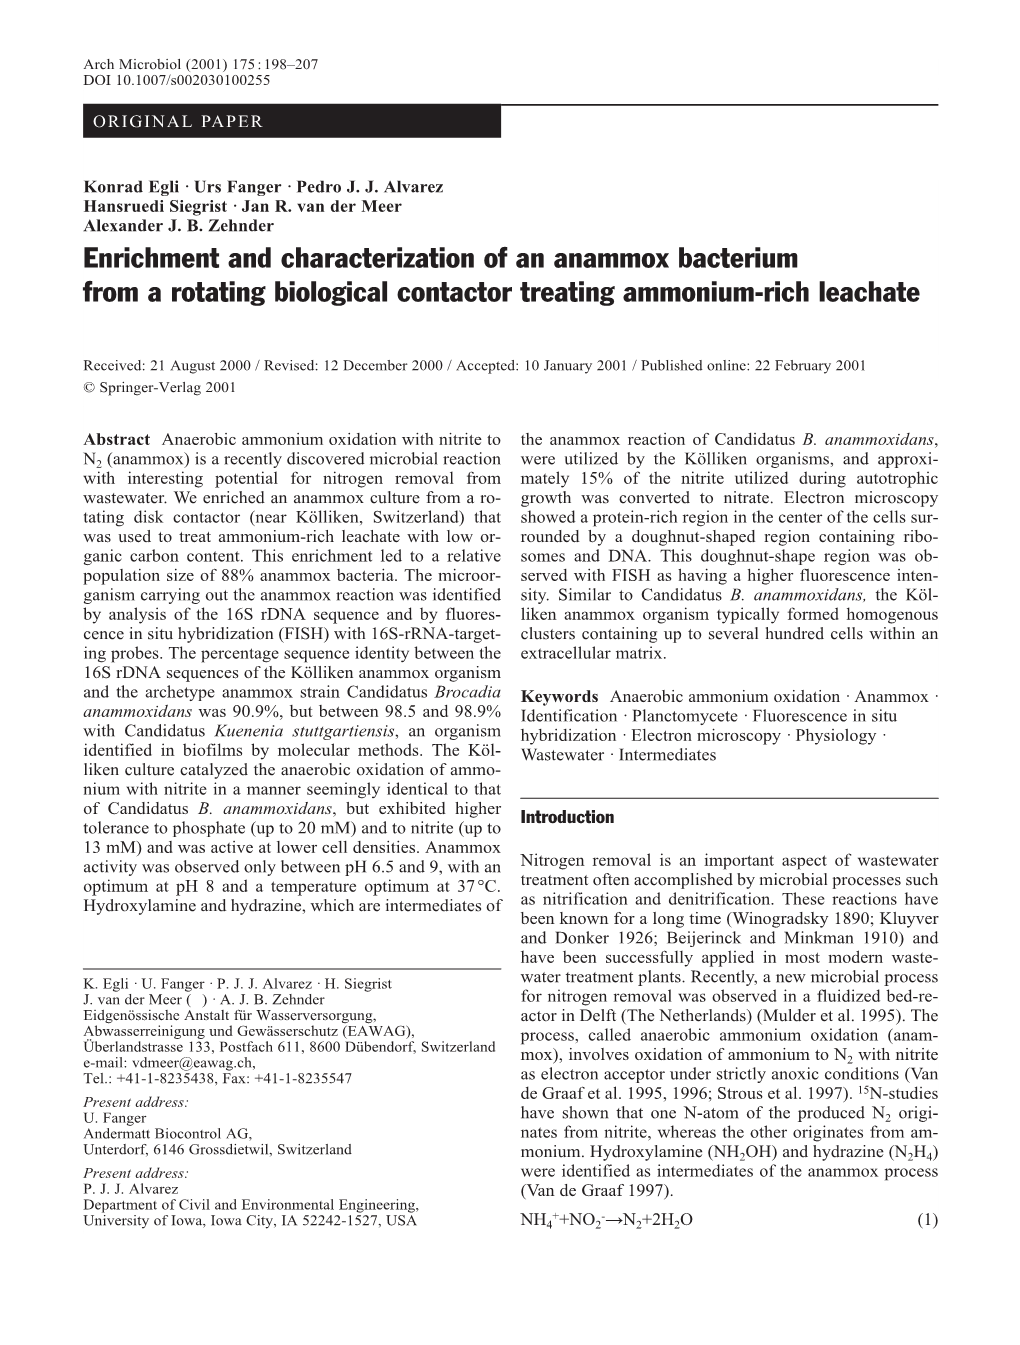 Enrichment and Characterization of an Anammox Bacterium from a Rotating Biological Contactor Treating Ammonium-Rich Leachate